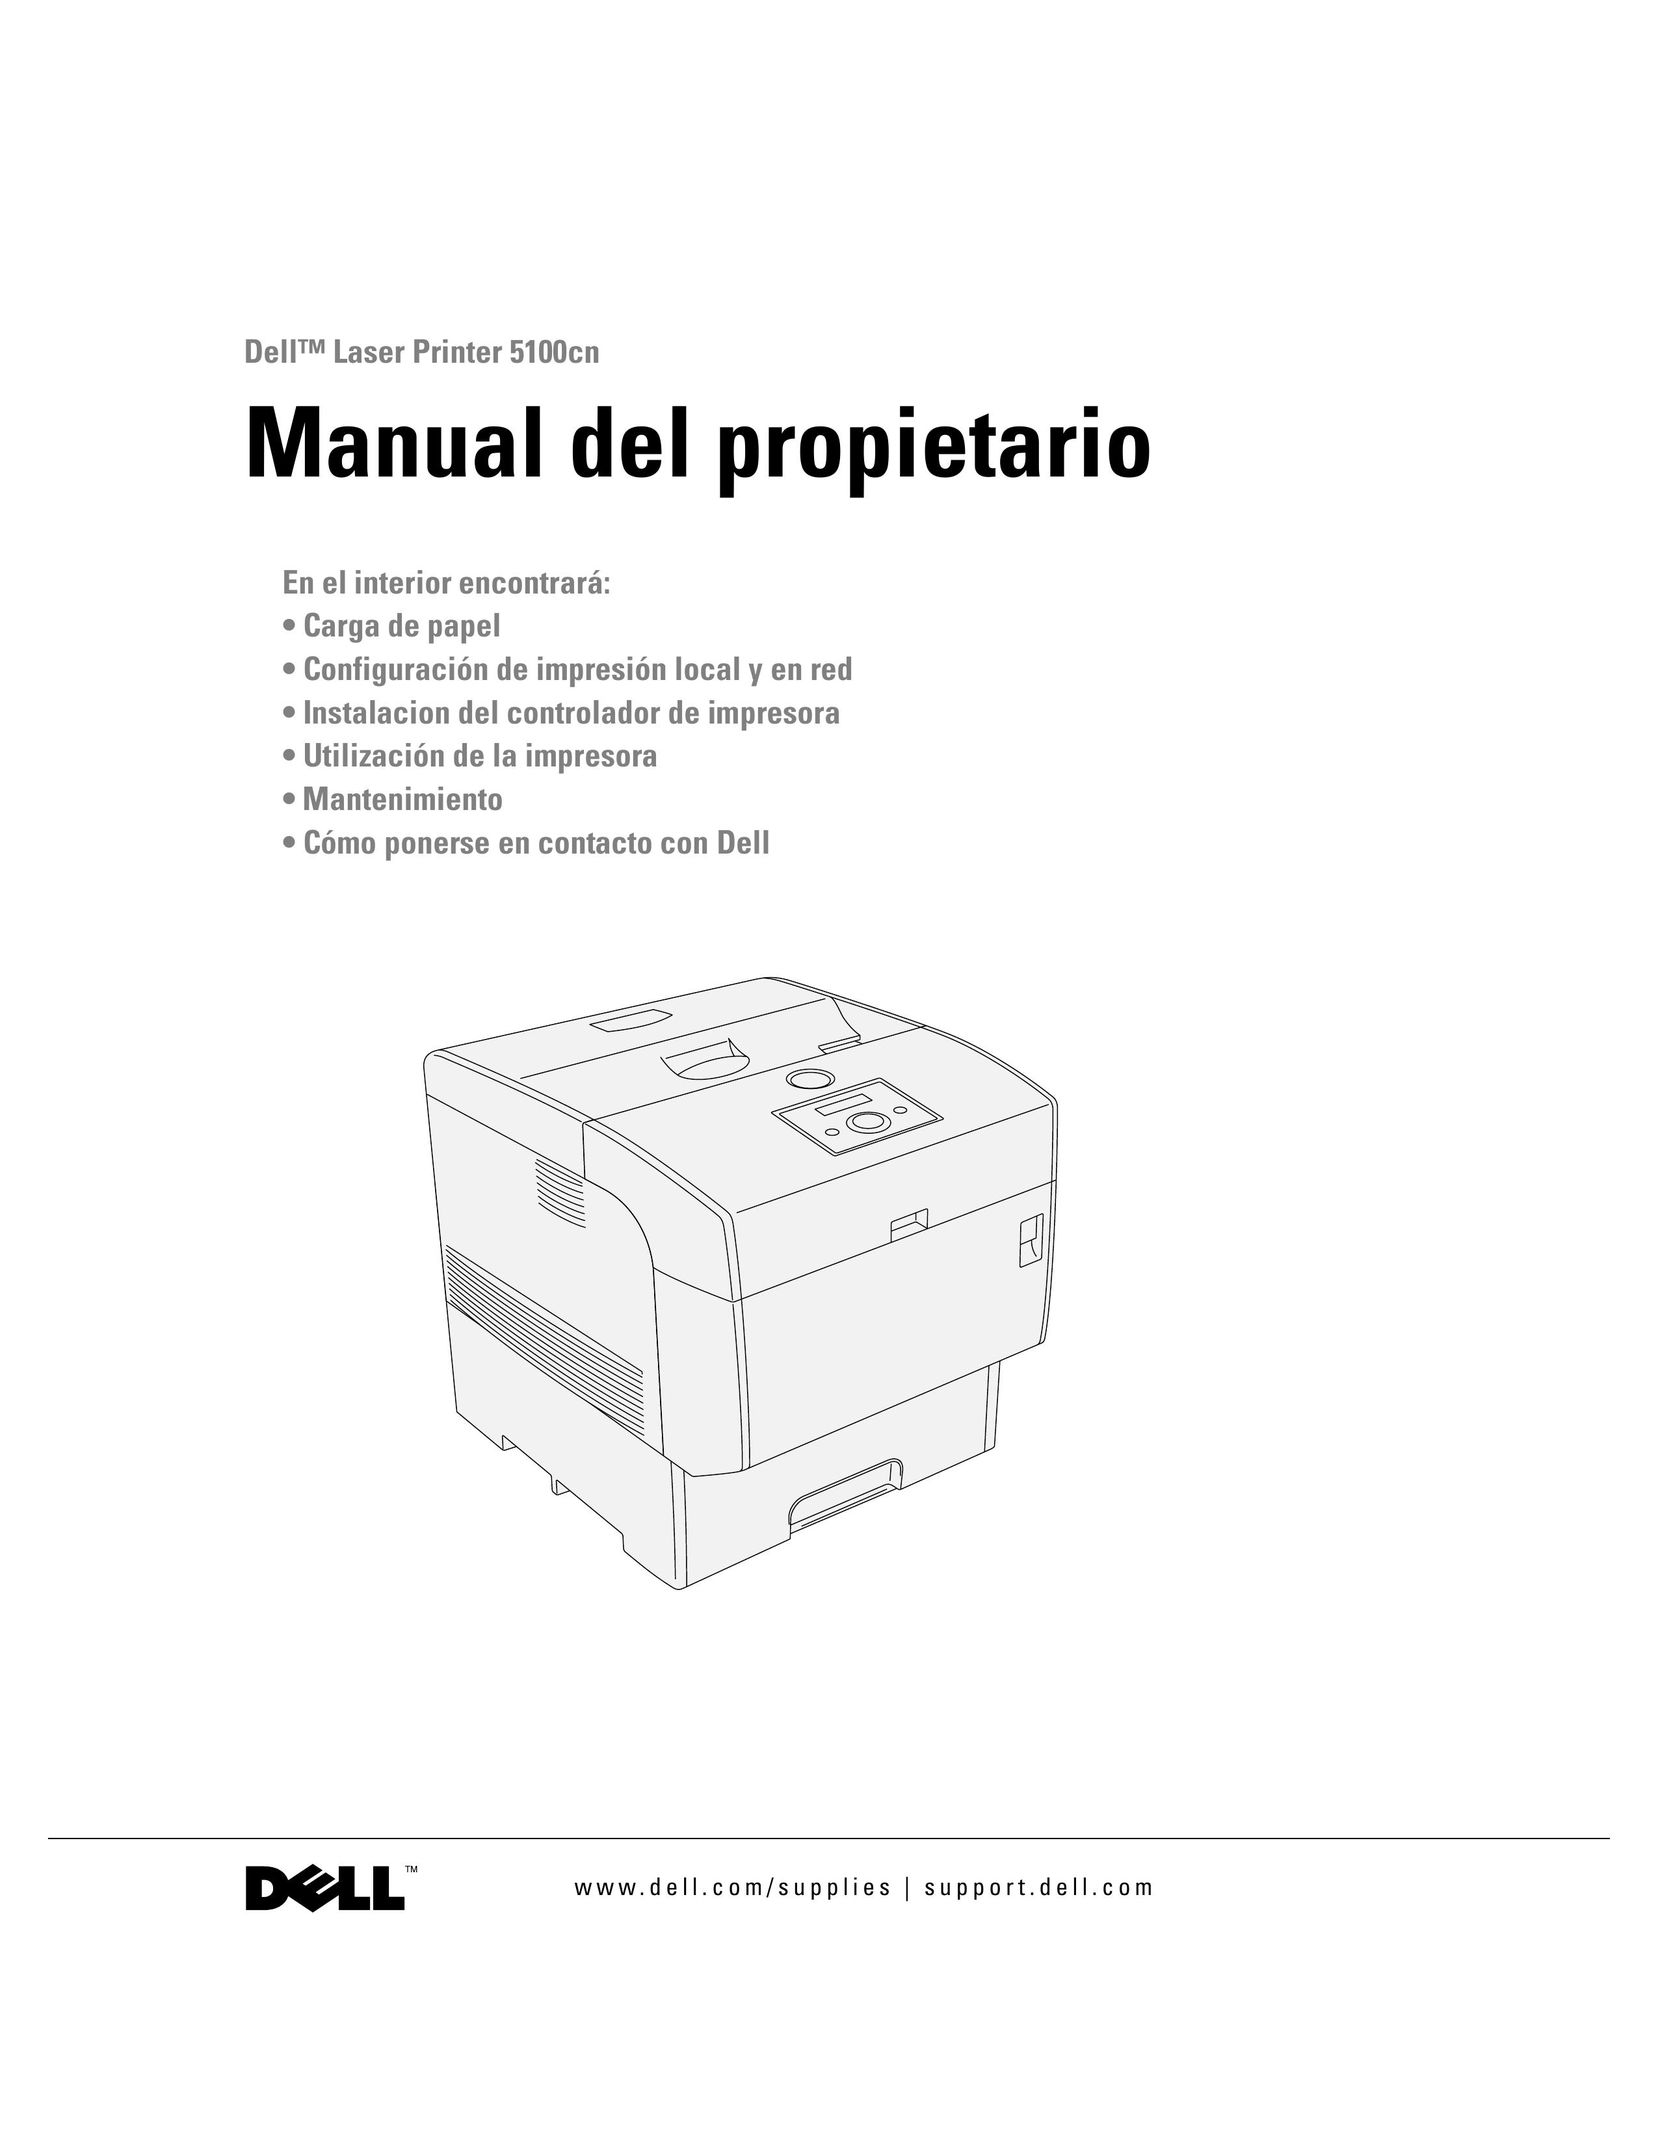 Dell 5100cn All in One Printer User Manual